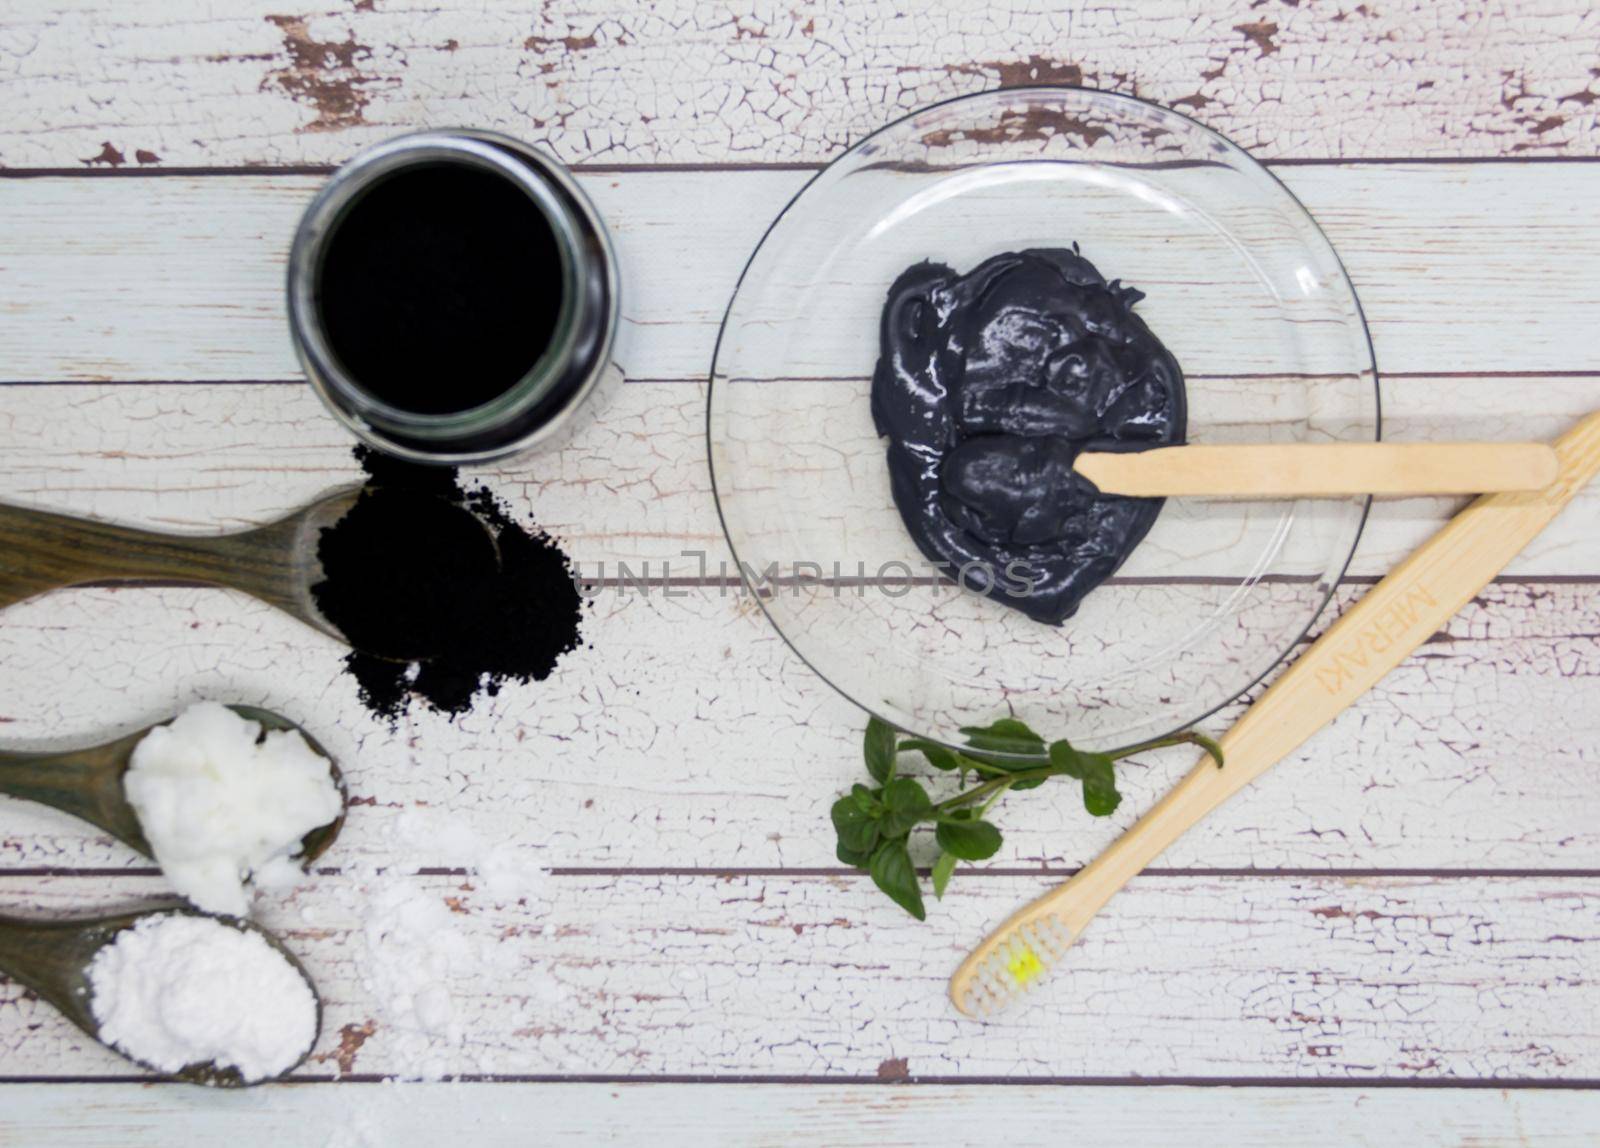 Ingredients for making activated charcoal toothpaste by GabrielaBertolini